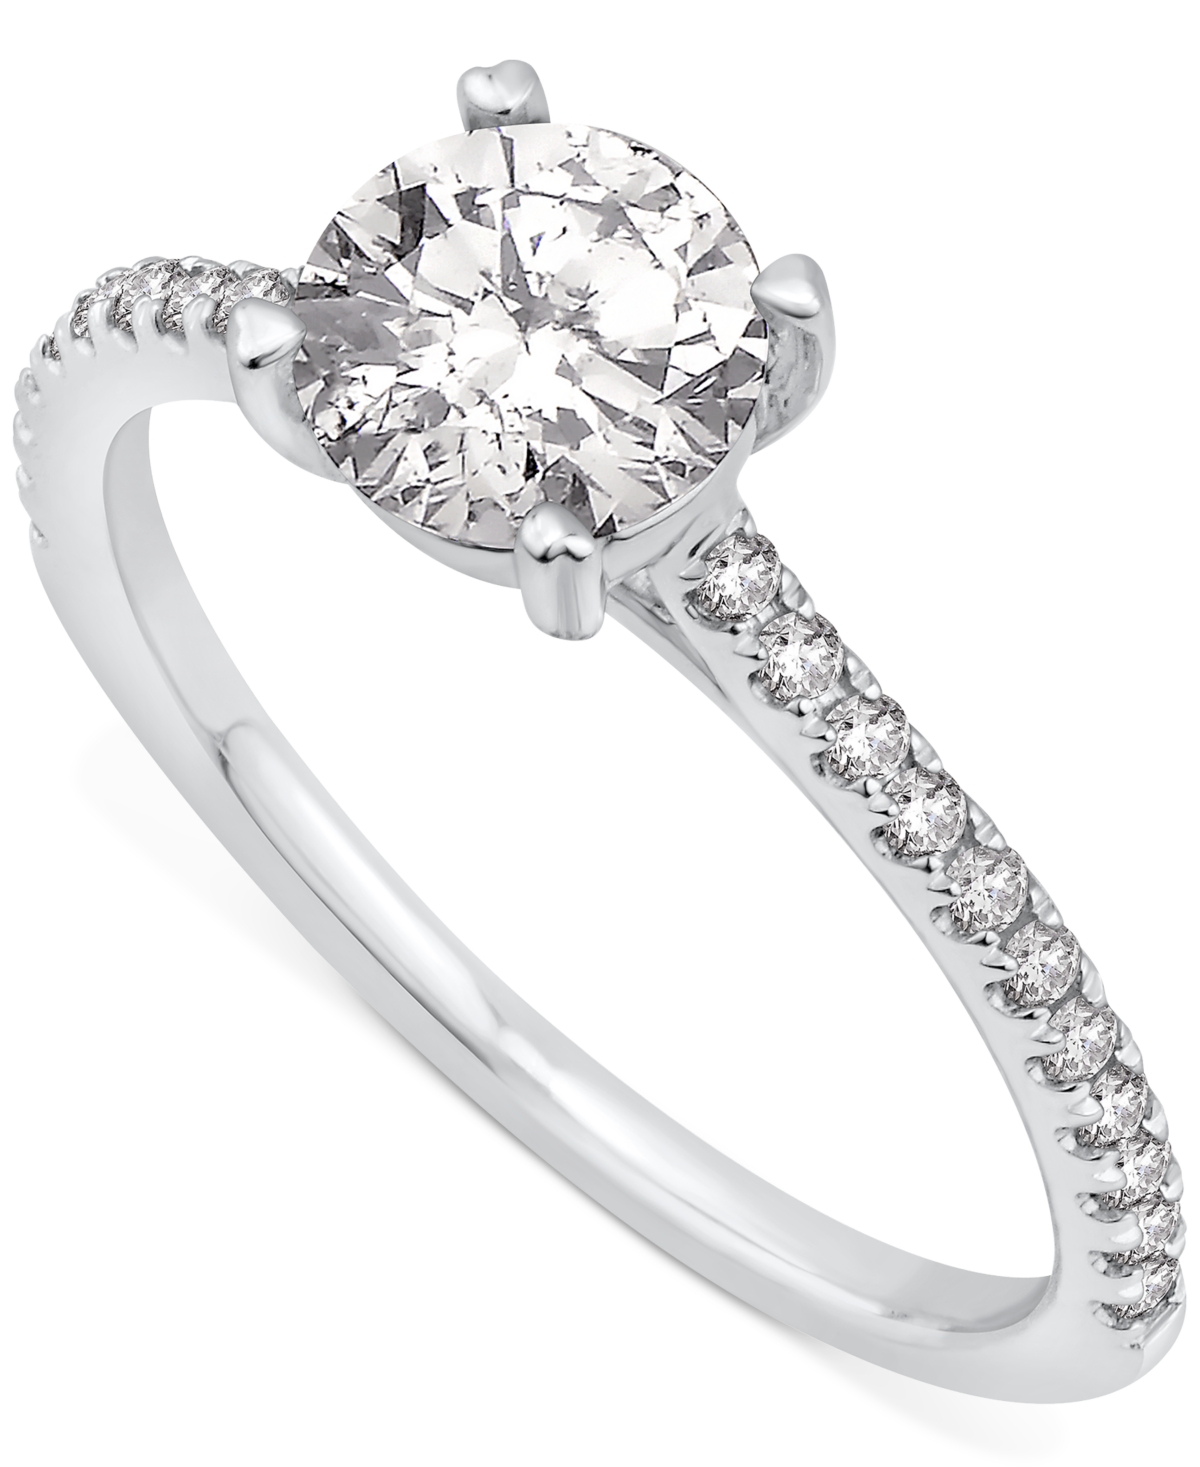 Gia Certified Diamond Engagement Ring (1-1/4 ct. t.w.) in 14k White Gold - White Gold